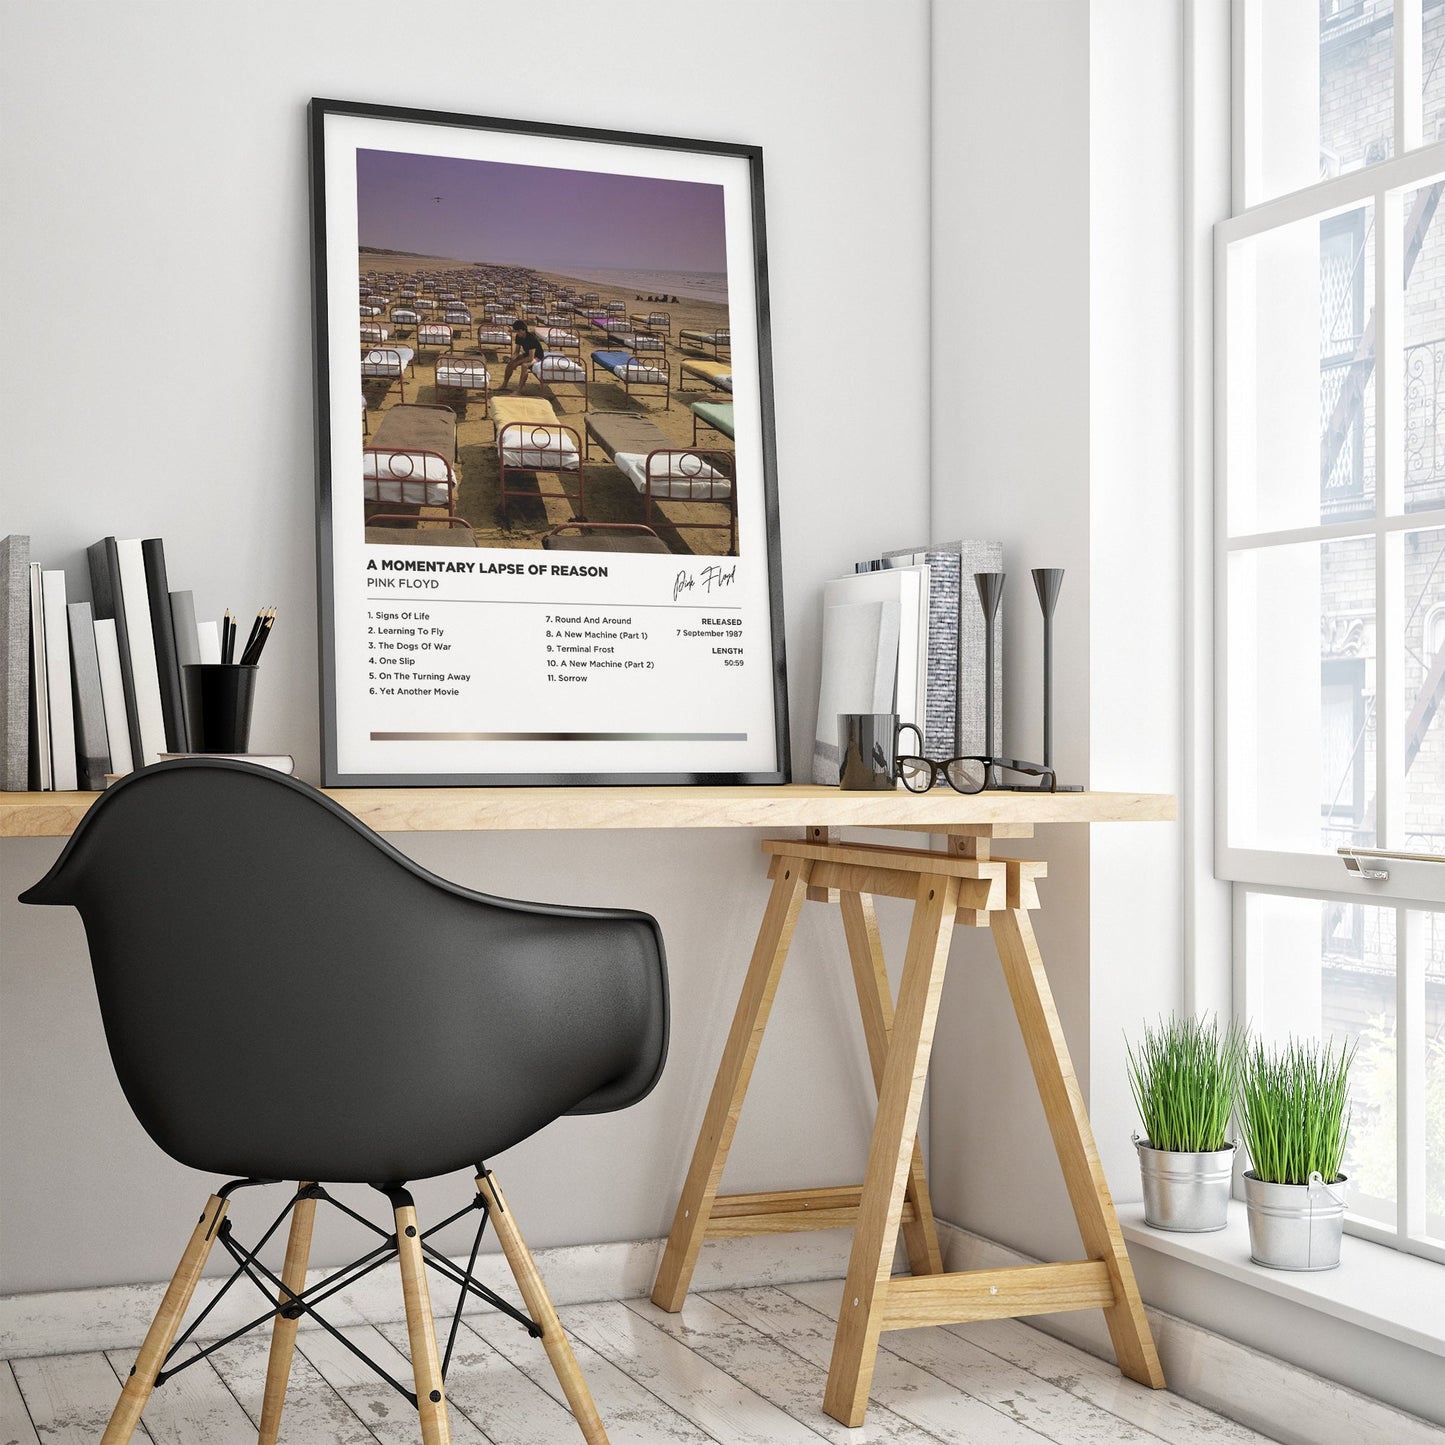 Pink Floyd - A Momentary Lapse Of Reason Framed Poster Print | Polaroid Style | Album Cover Artwork